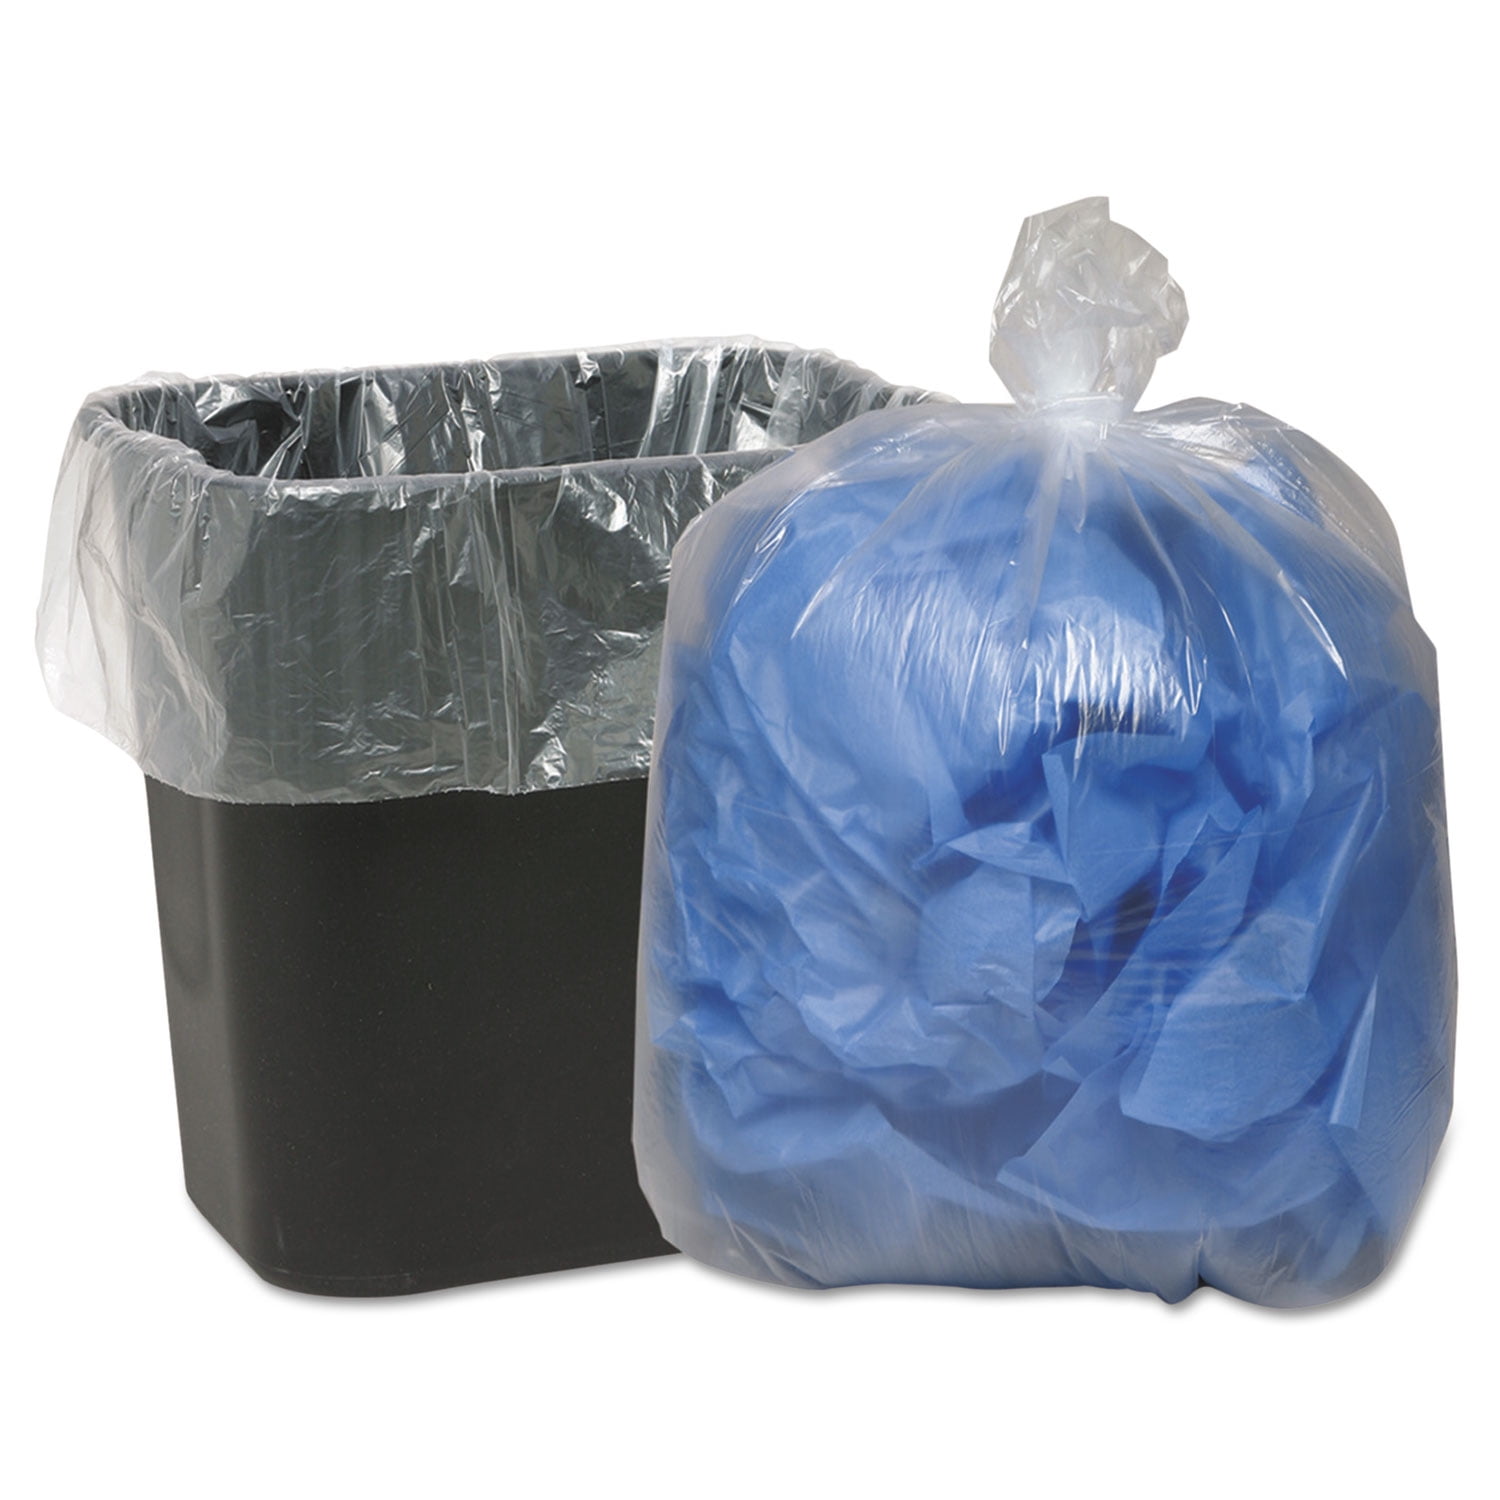 15 x 9 x 23 x .48 mil 7 to 10 Gallon Clear Plastic Linear Low Density Trash Can Liners Case of 1,000 